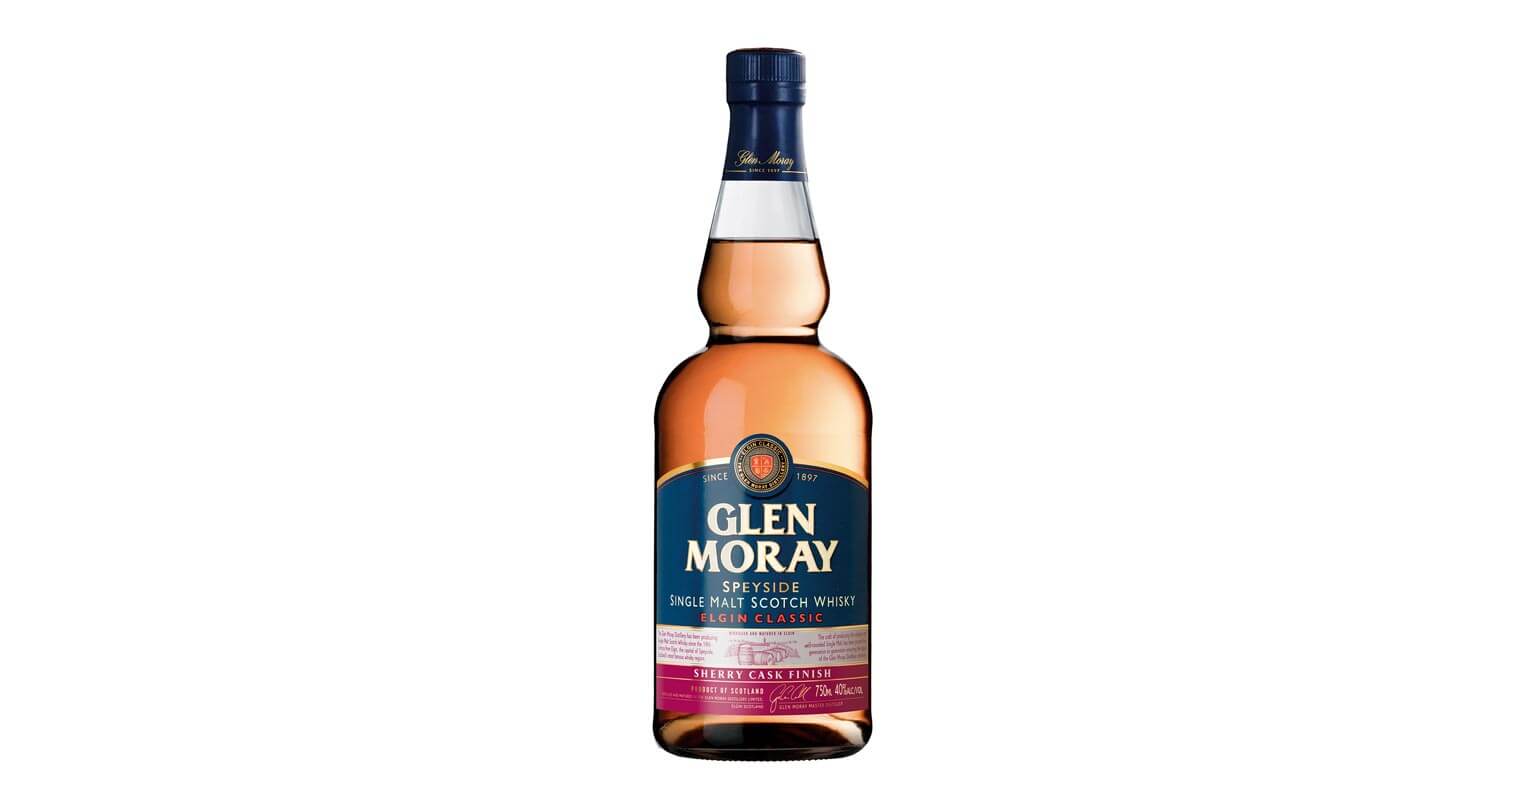 Glen Moray Classic Sherry Cask Finish, featured image